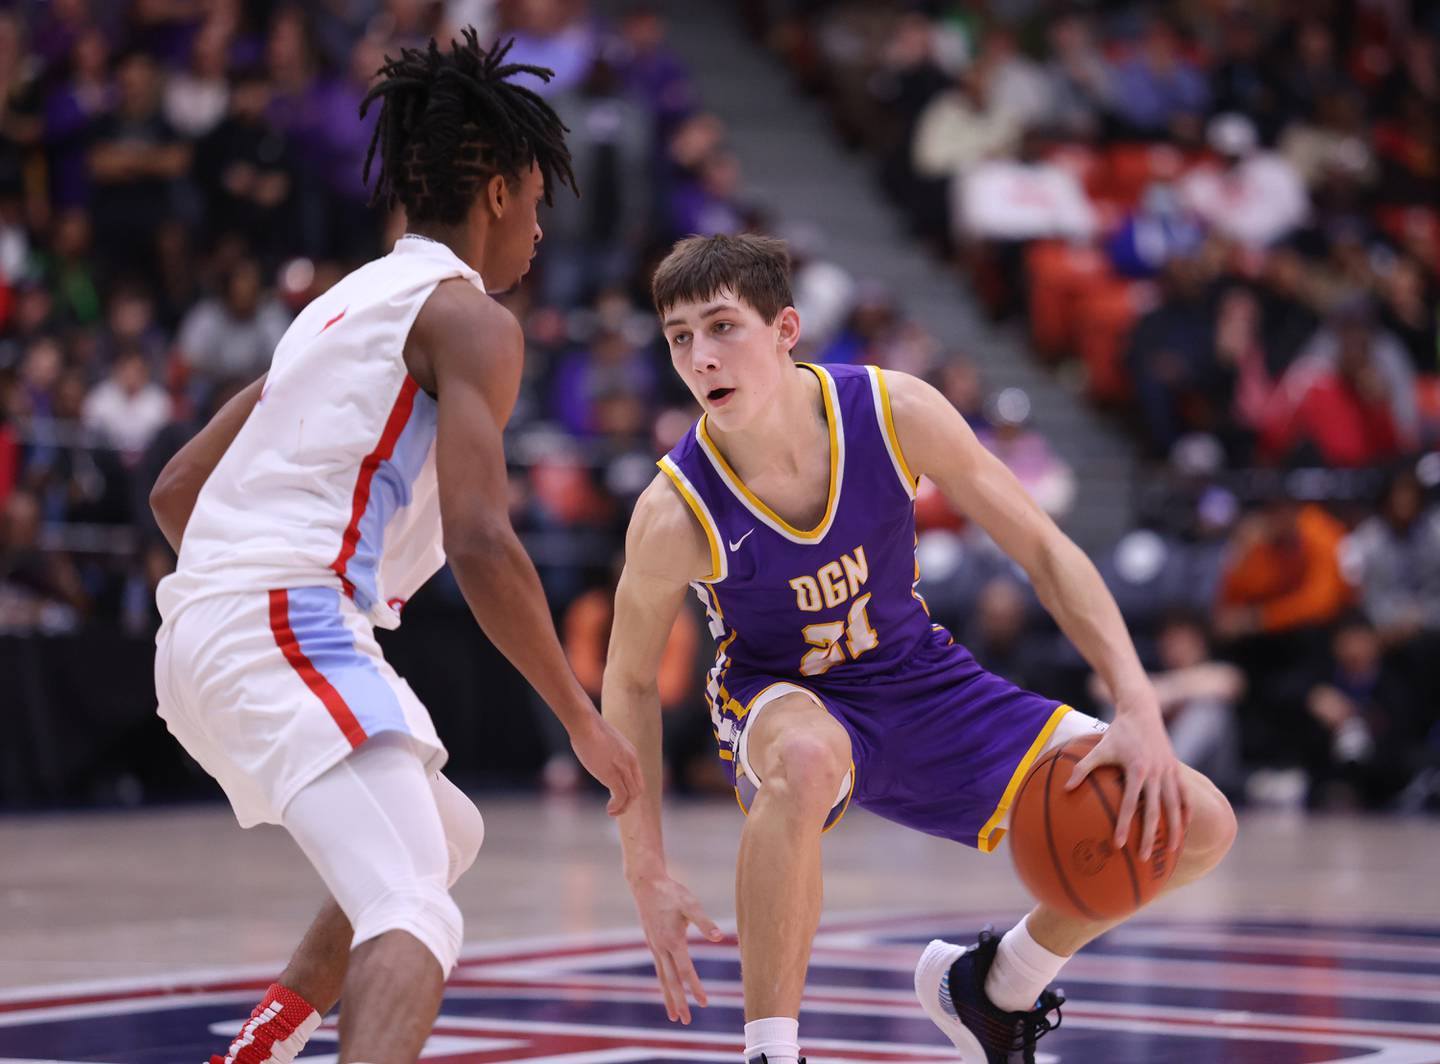 Downers Grove North's Jack Stanton (21) plans his attack during the boys 4A super-sectional game between Kenwood Academy and Downers Grove North high school in Chicago on Monday, March 6, 2023.